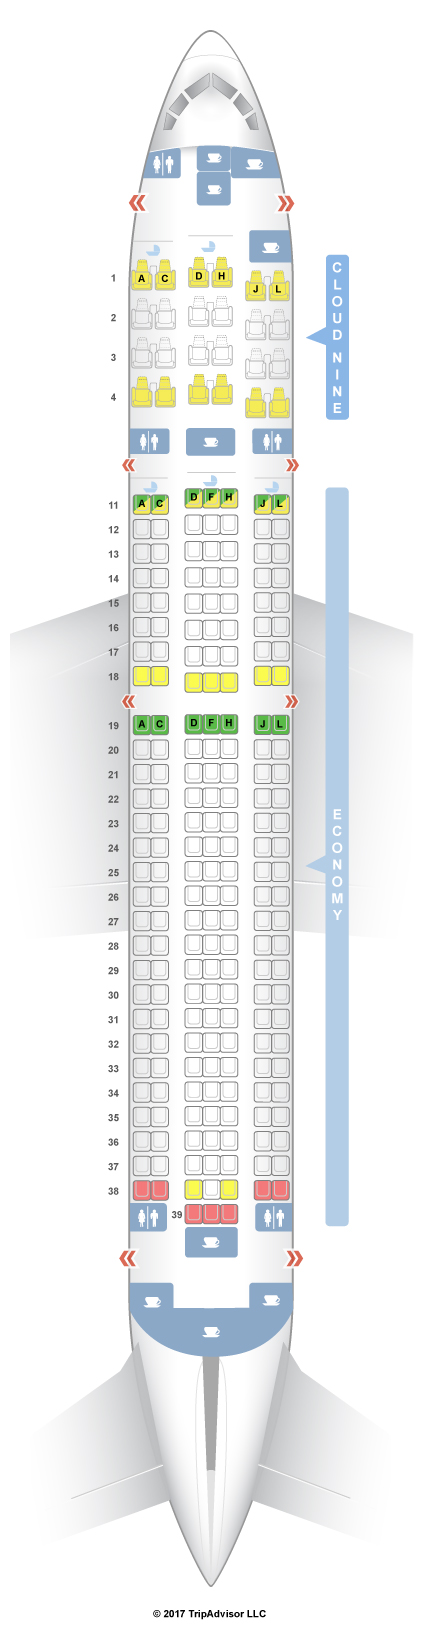 Boeing 767 Jet Seating Chart